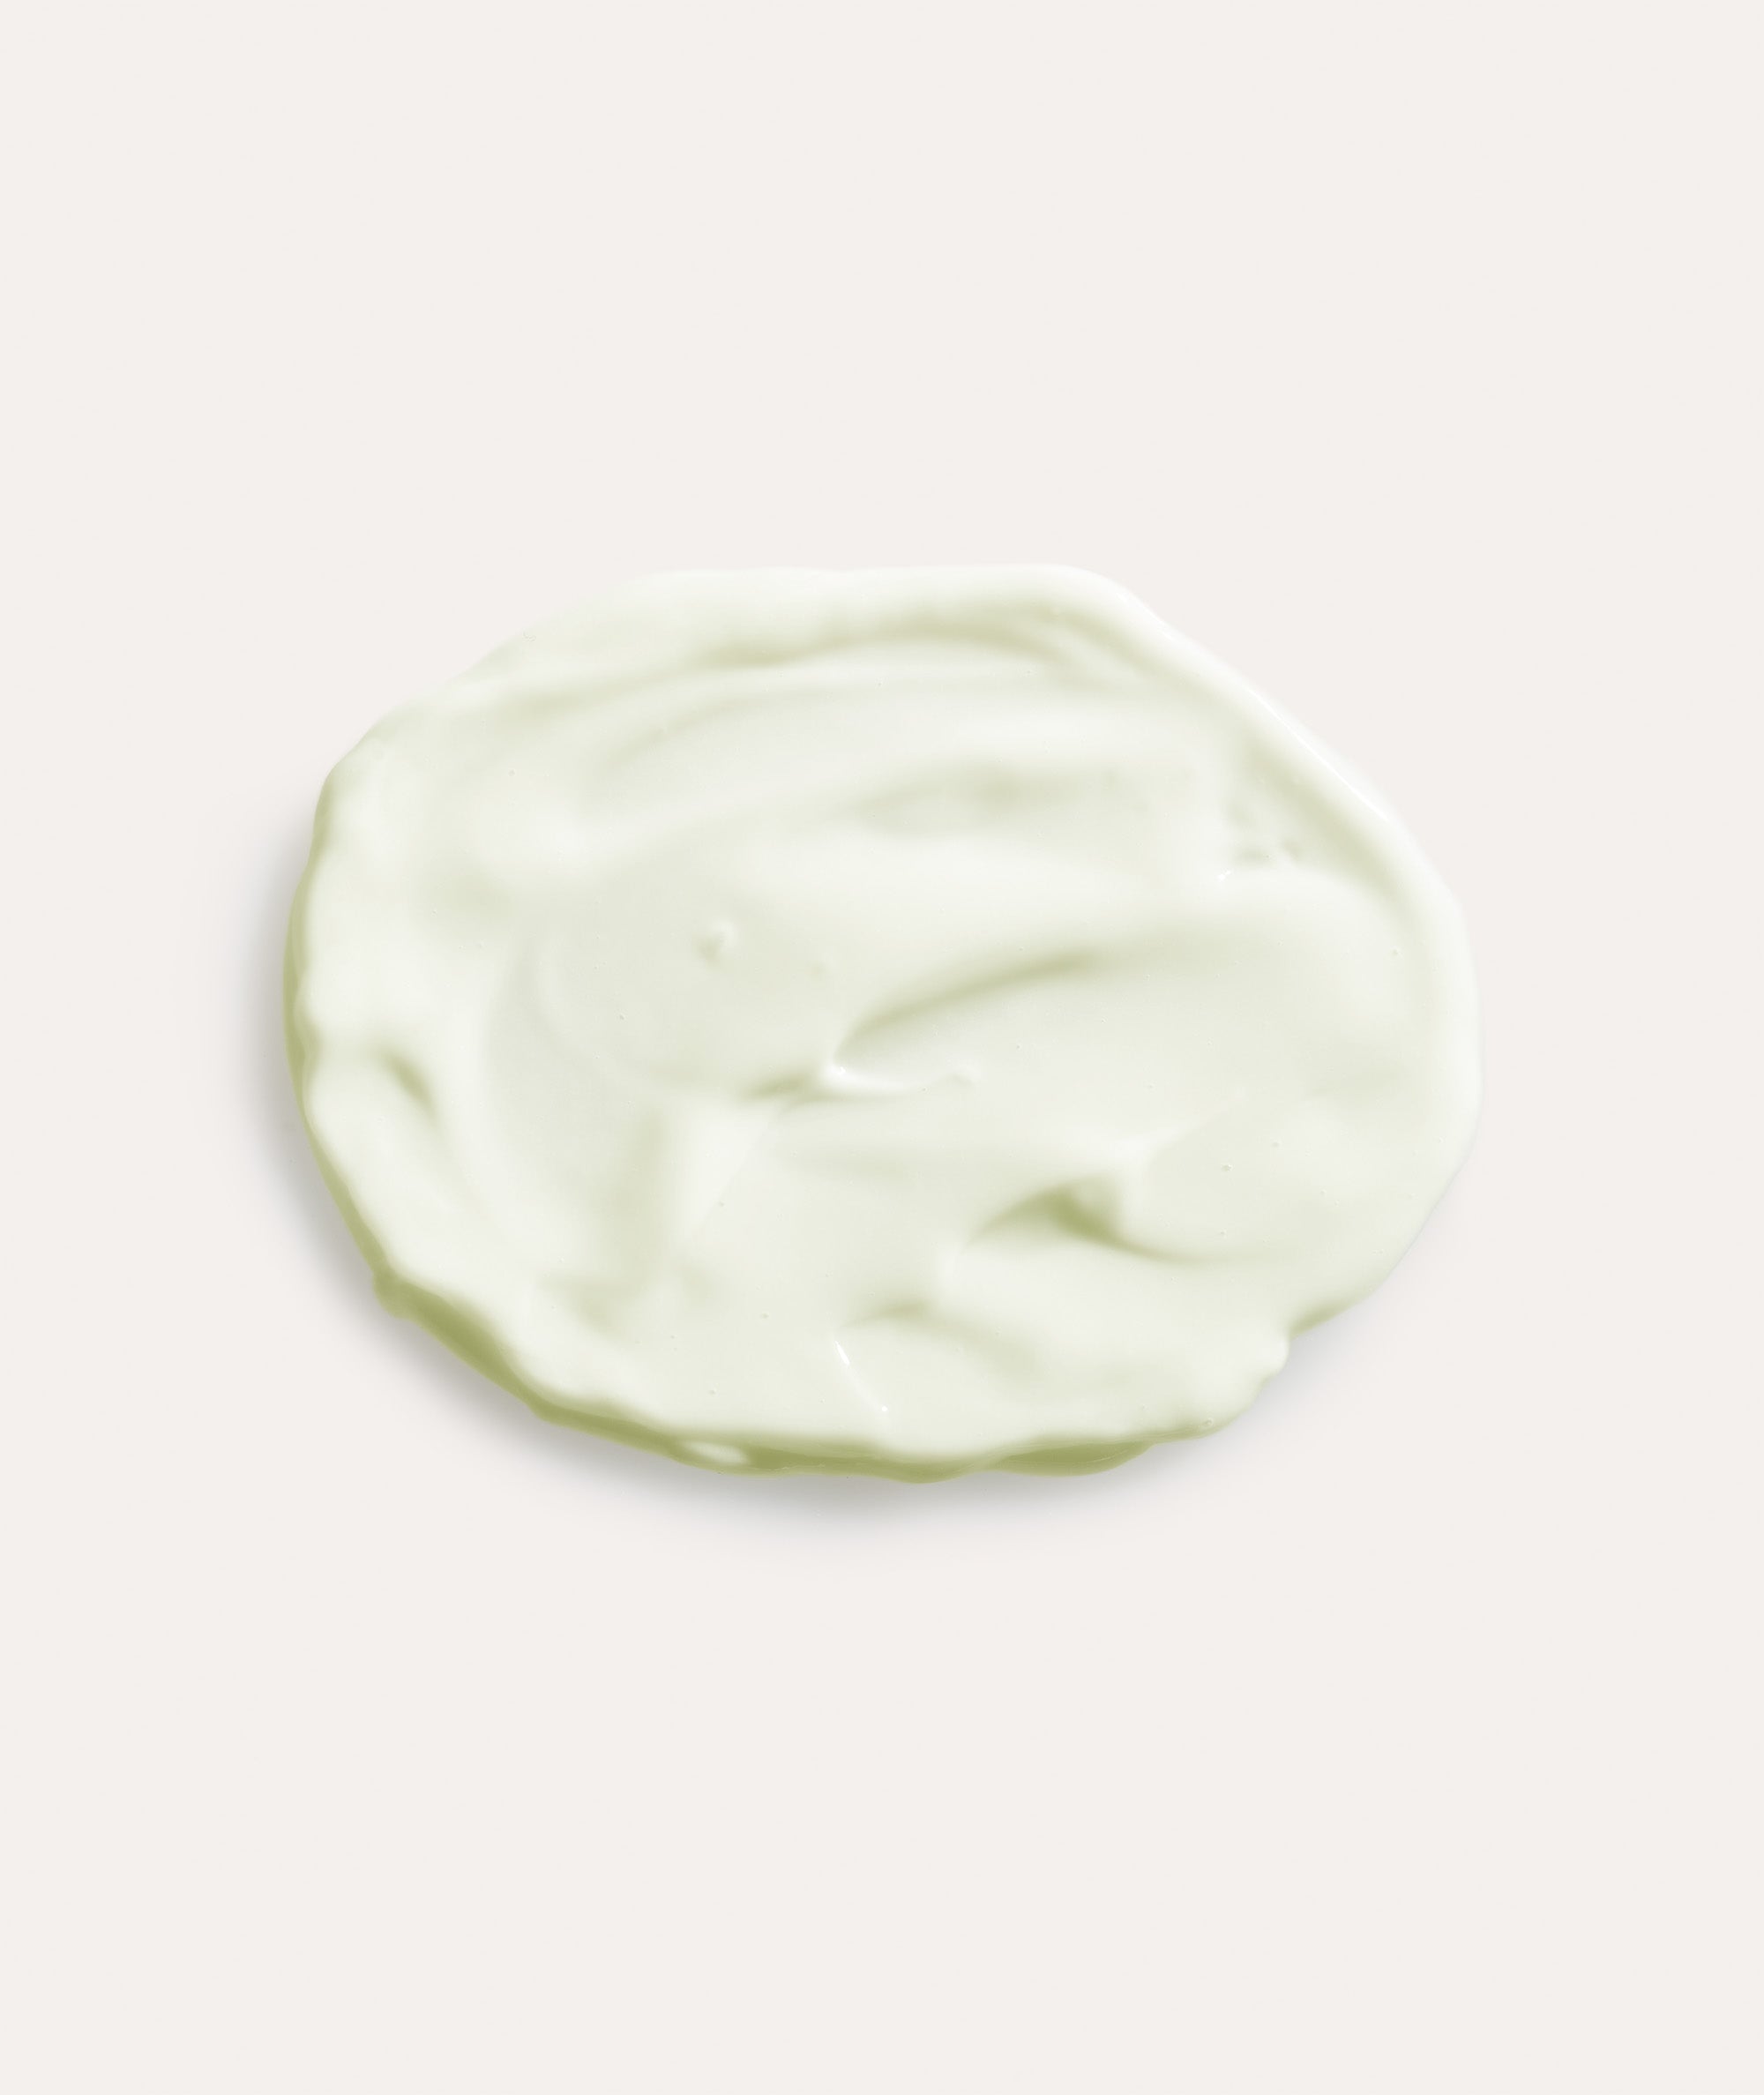 Color and texture of the Borghese Overnight Resurfacing Mask with AHA & BHA 